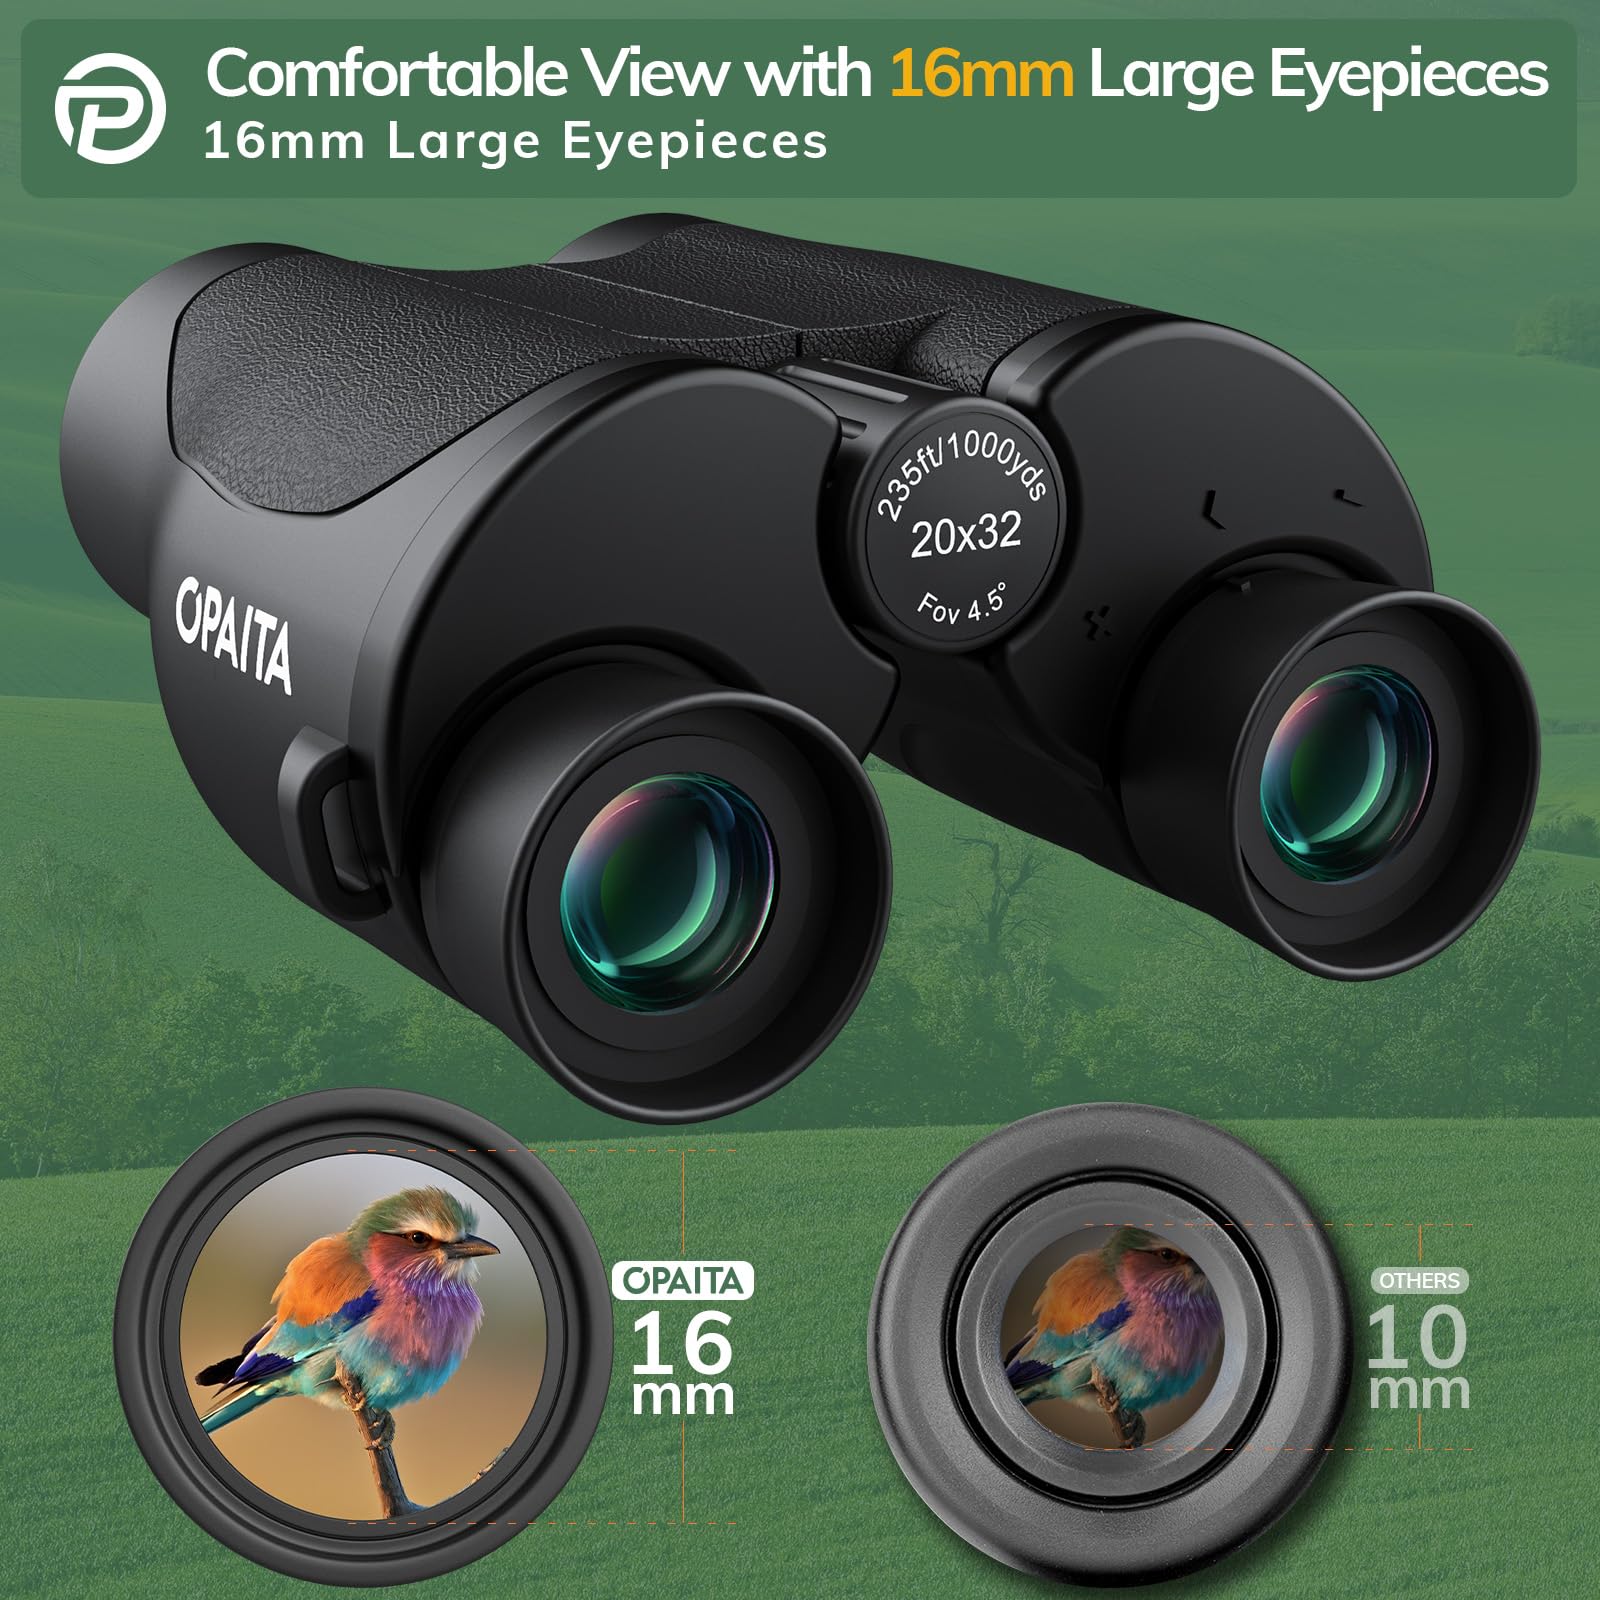 20x32 Binoculars for Adults Kids High Powered with Sharper Vision - Compact Binoculars with Comfortable View - High Definition Small Binocs for Bird Watching Cruise Trip Hunting Travel Concert Hiking